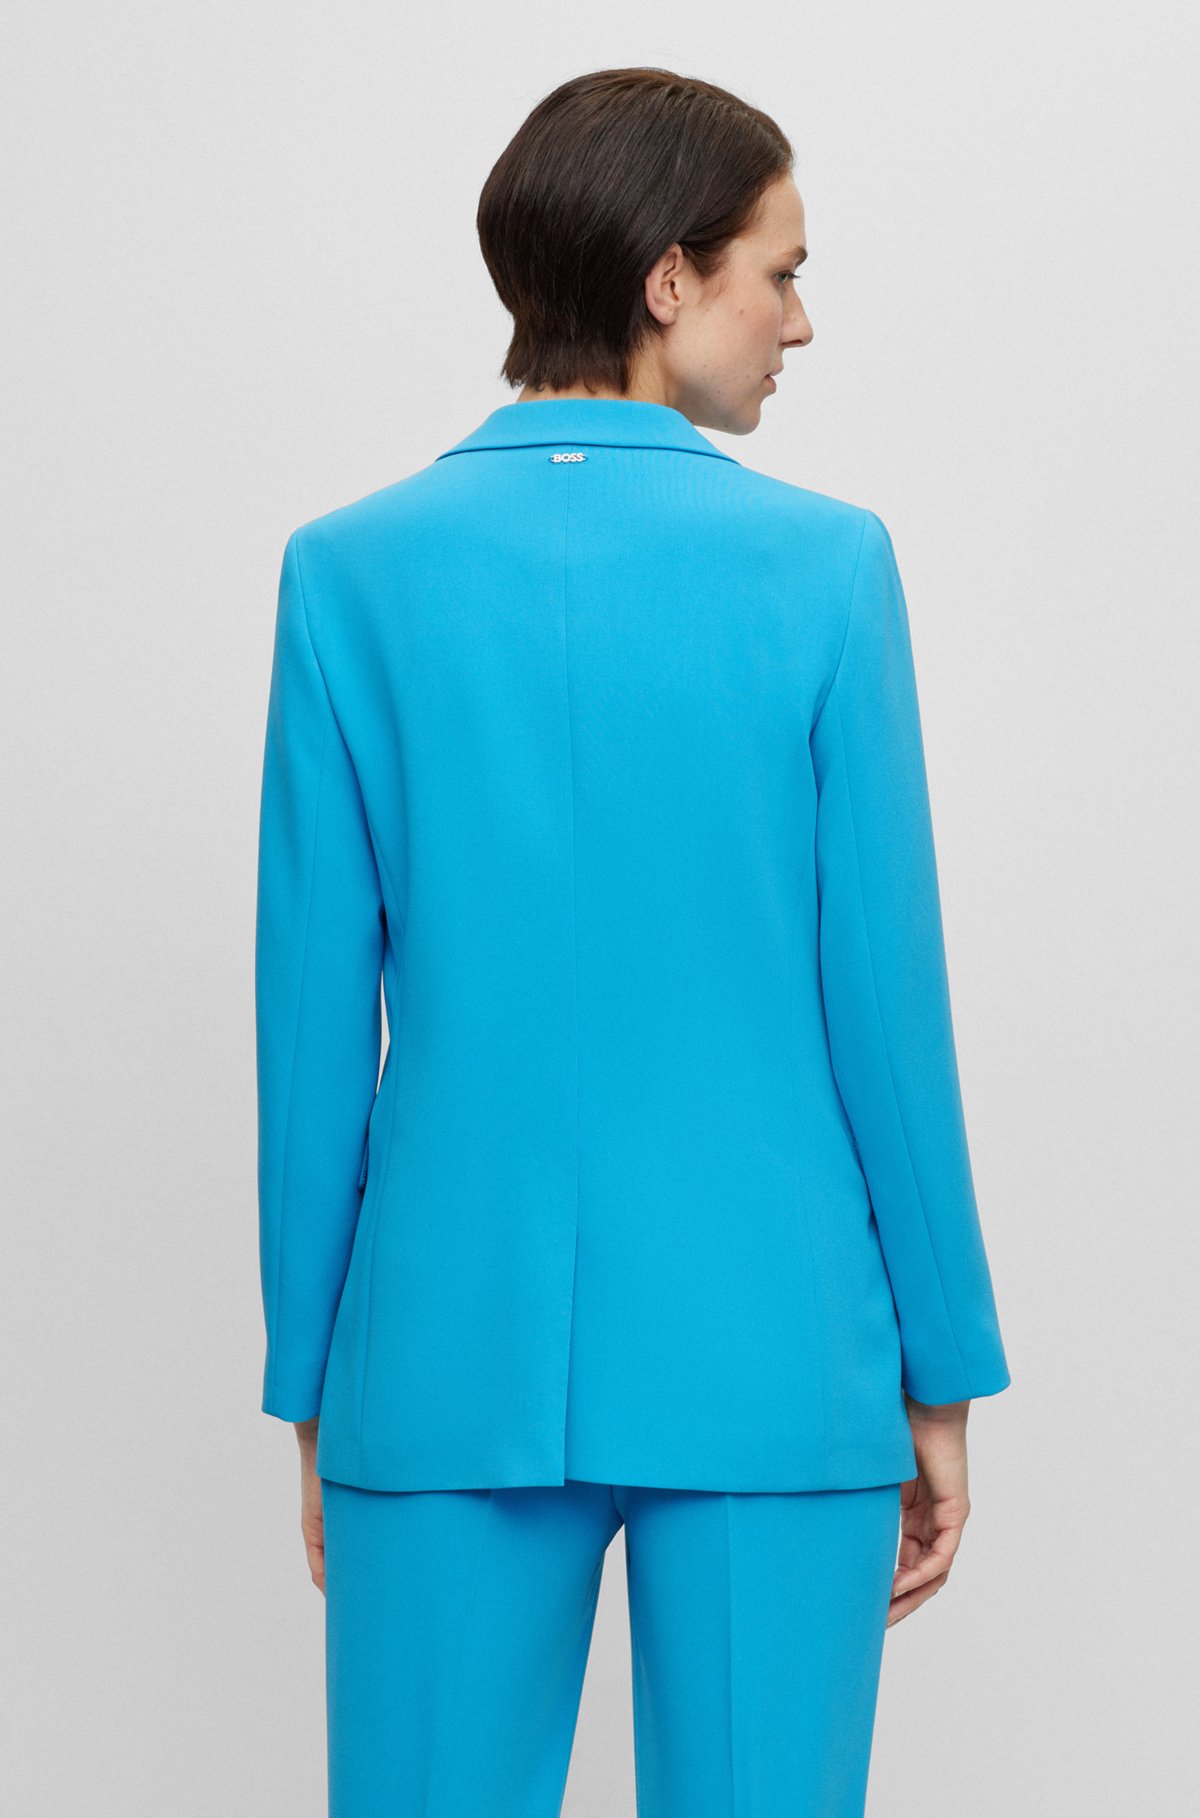 Regular-fit jacket in crease-resistant crepe, Turquoise